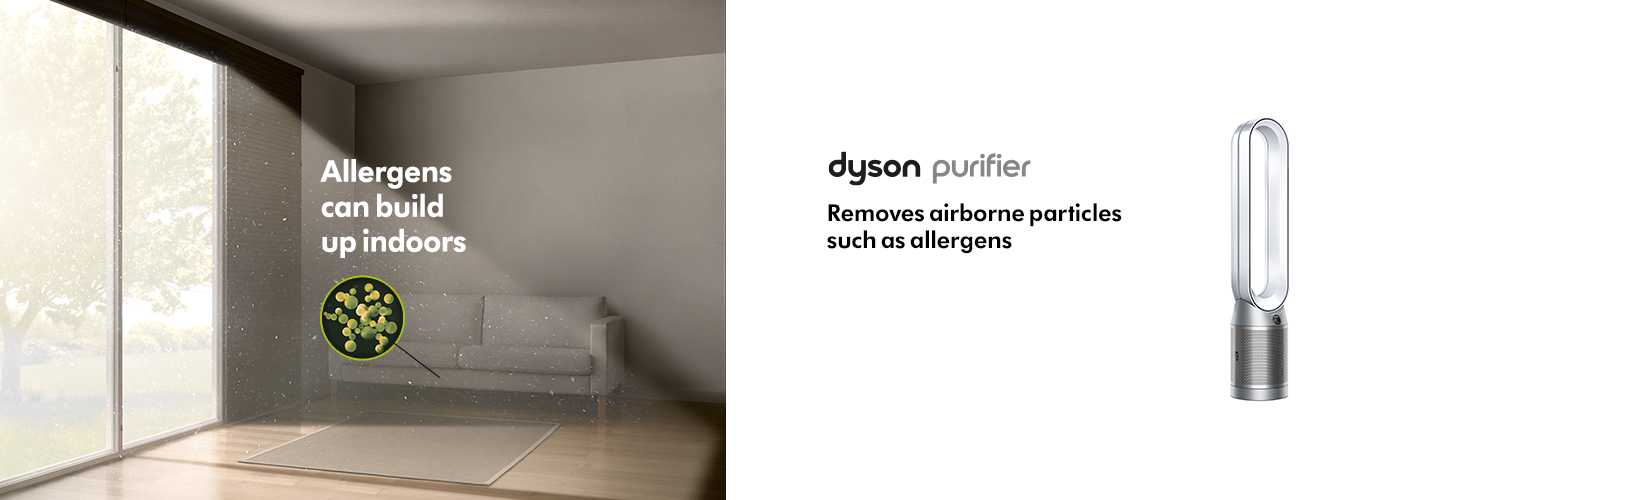 Dyson purifier. Removes airborne particles such as allergens.